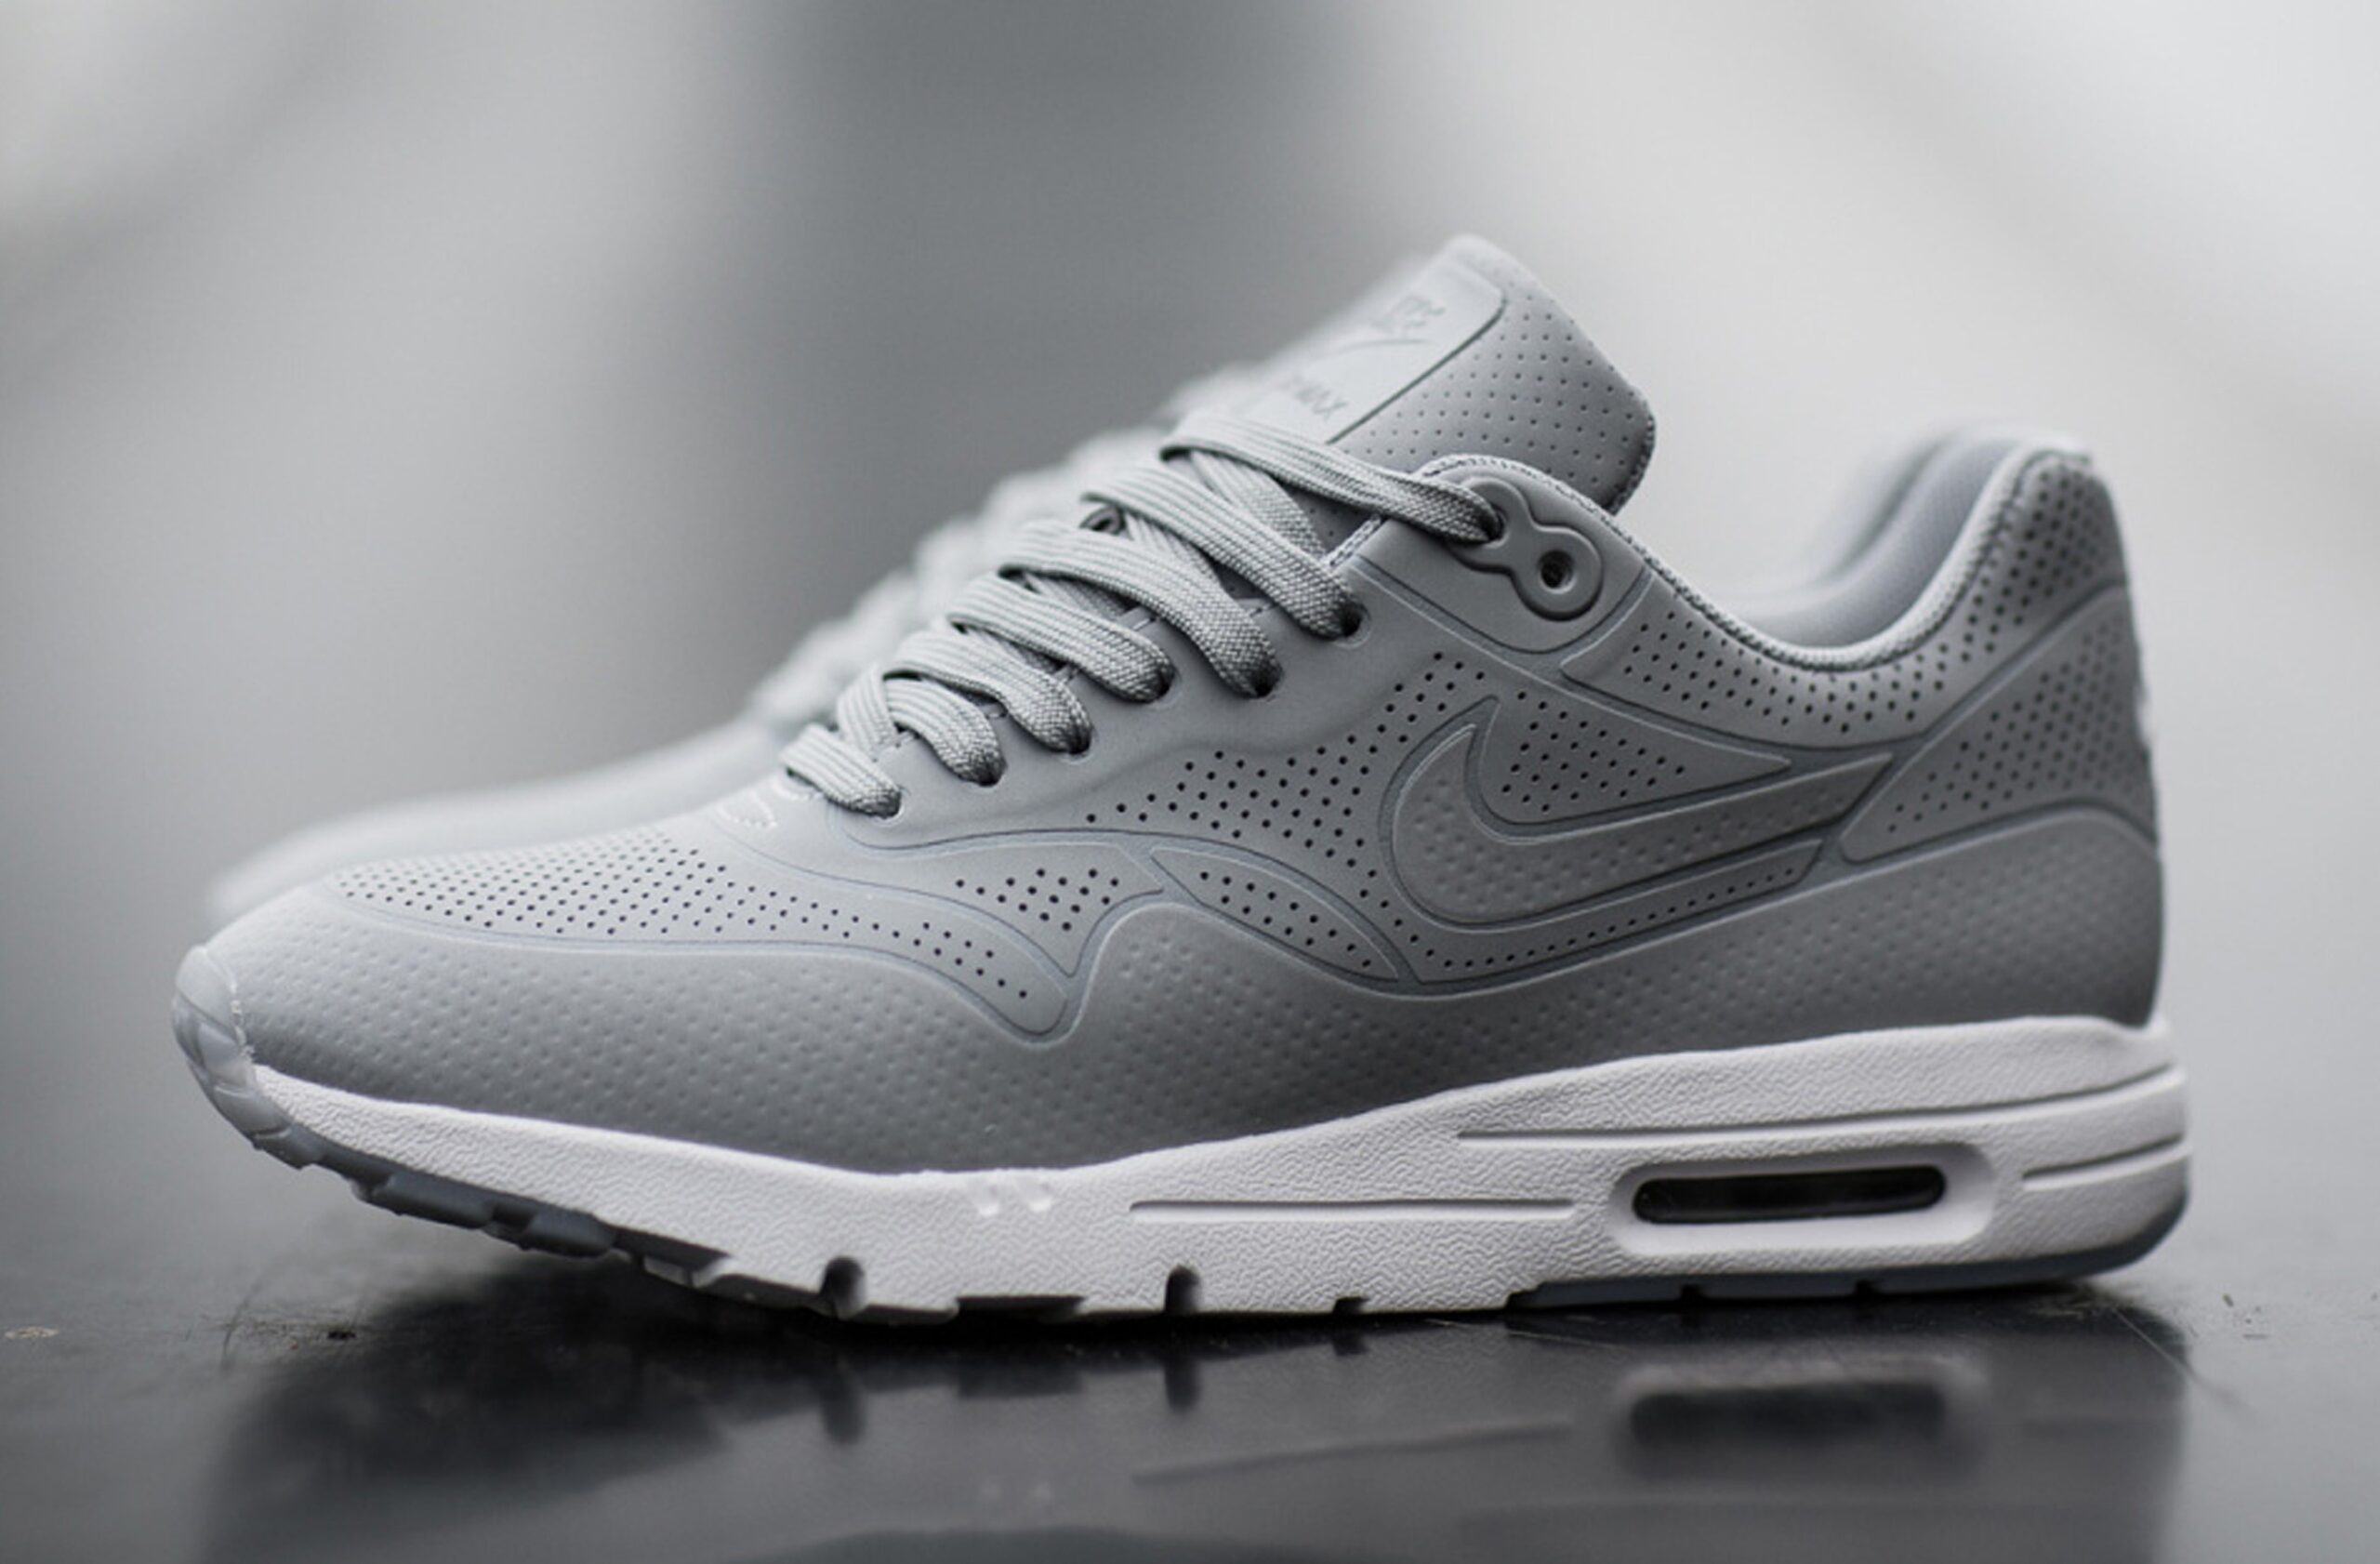 Nike Air Max 1 Ultra Moire “Wolf Grey”